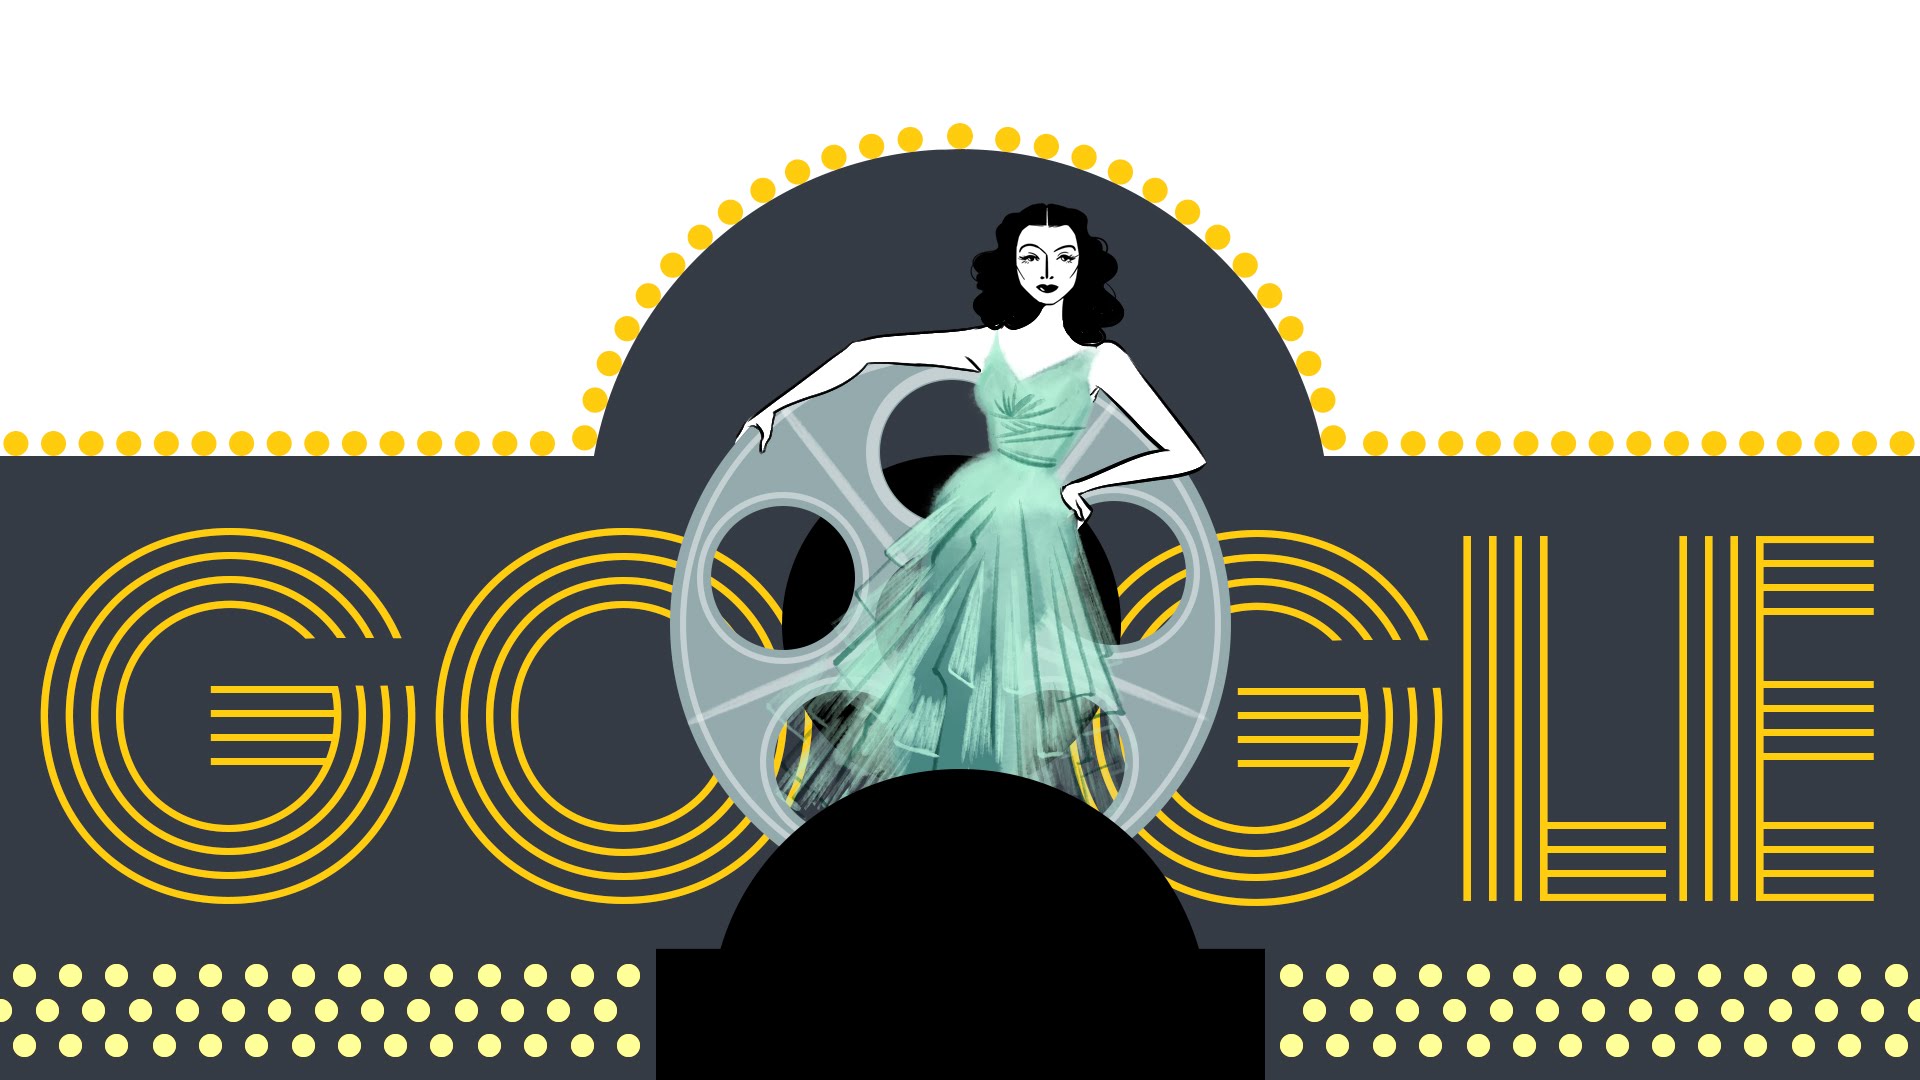 Google celebrates Hedy Lamarr who is behind how Bluetooth works